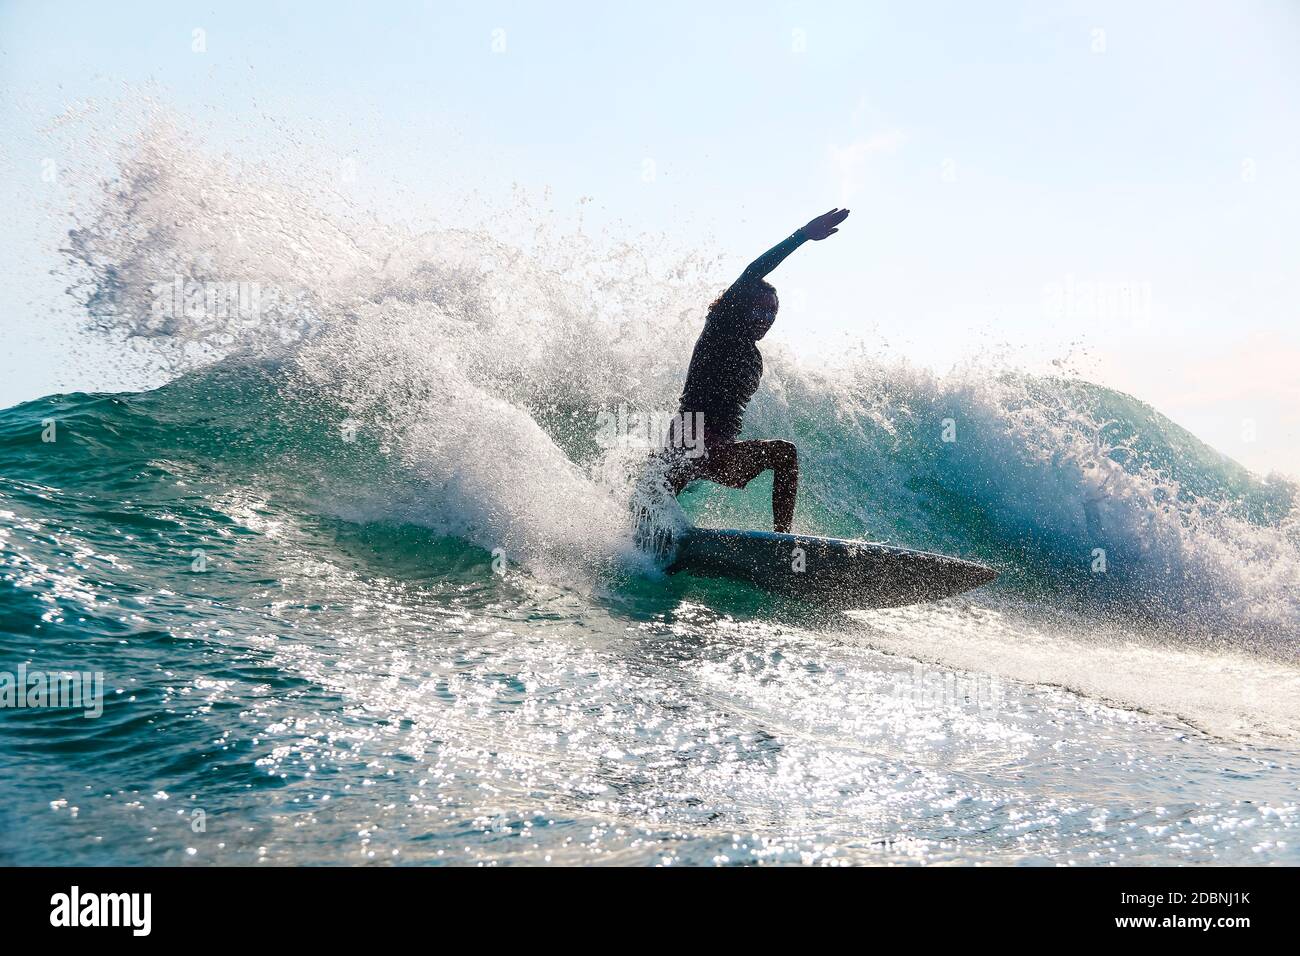 Surfer on a wave,Lombok,Indonesia Stock Photo